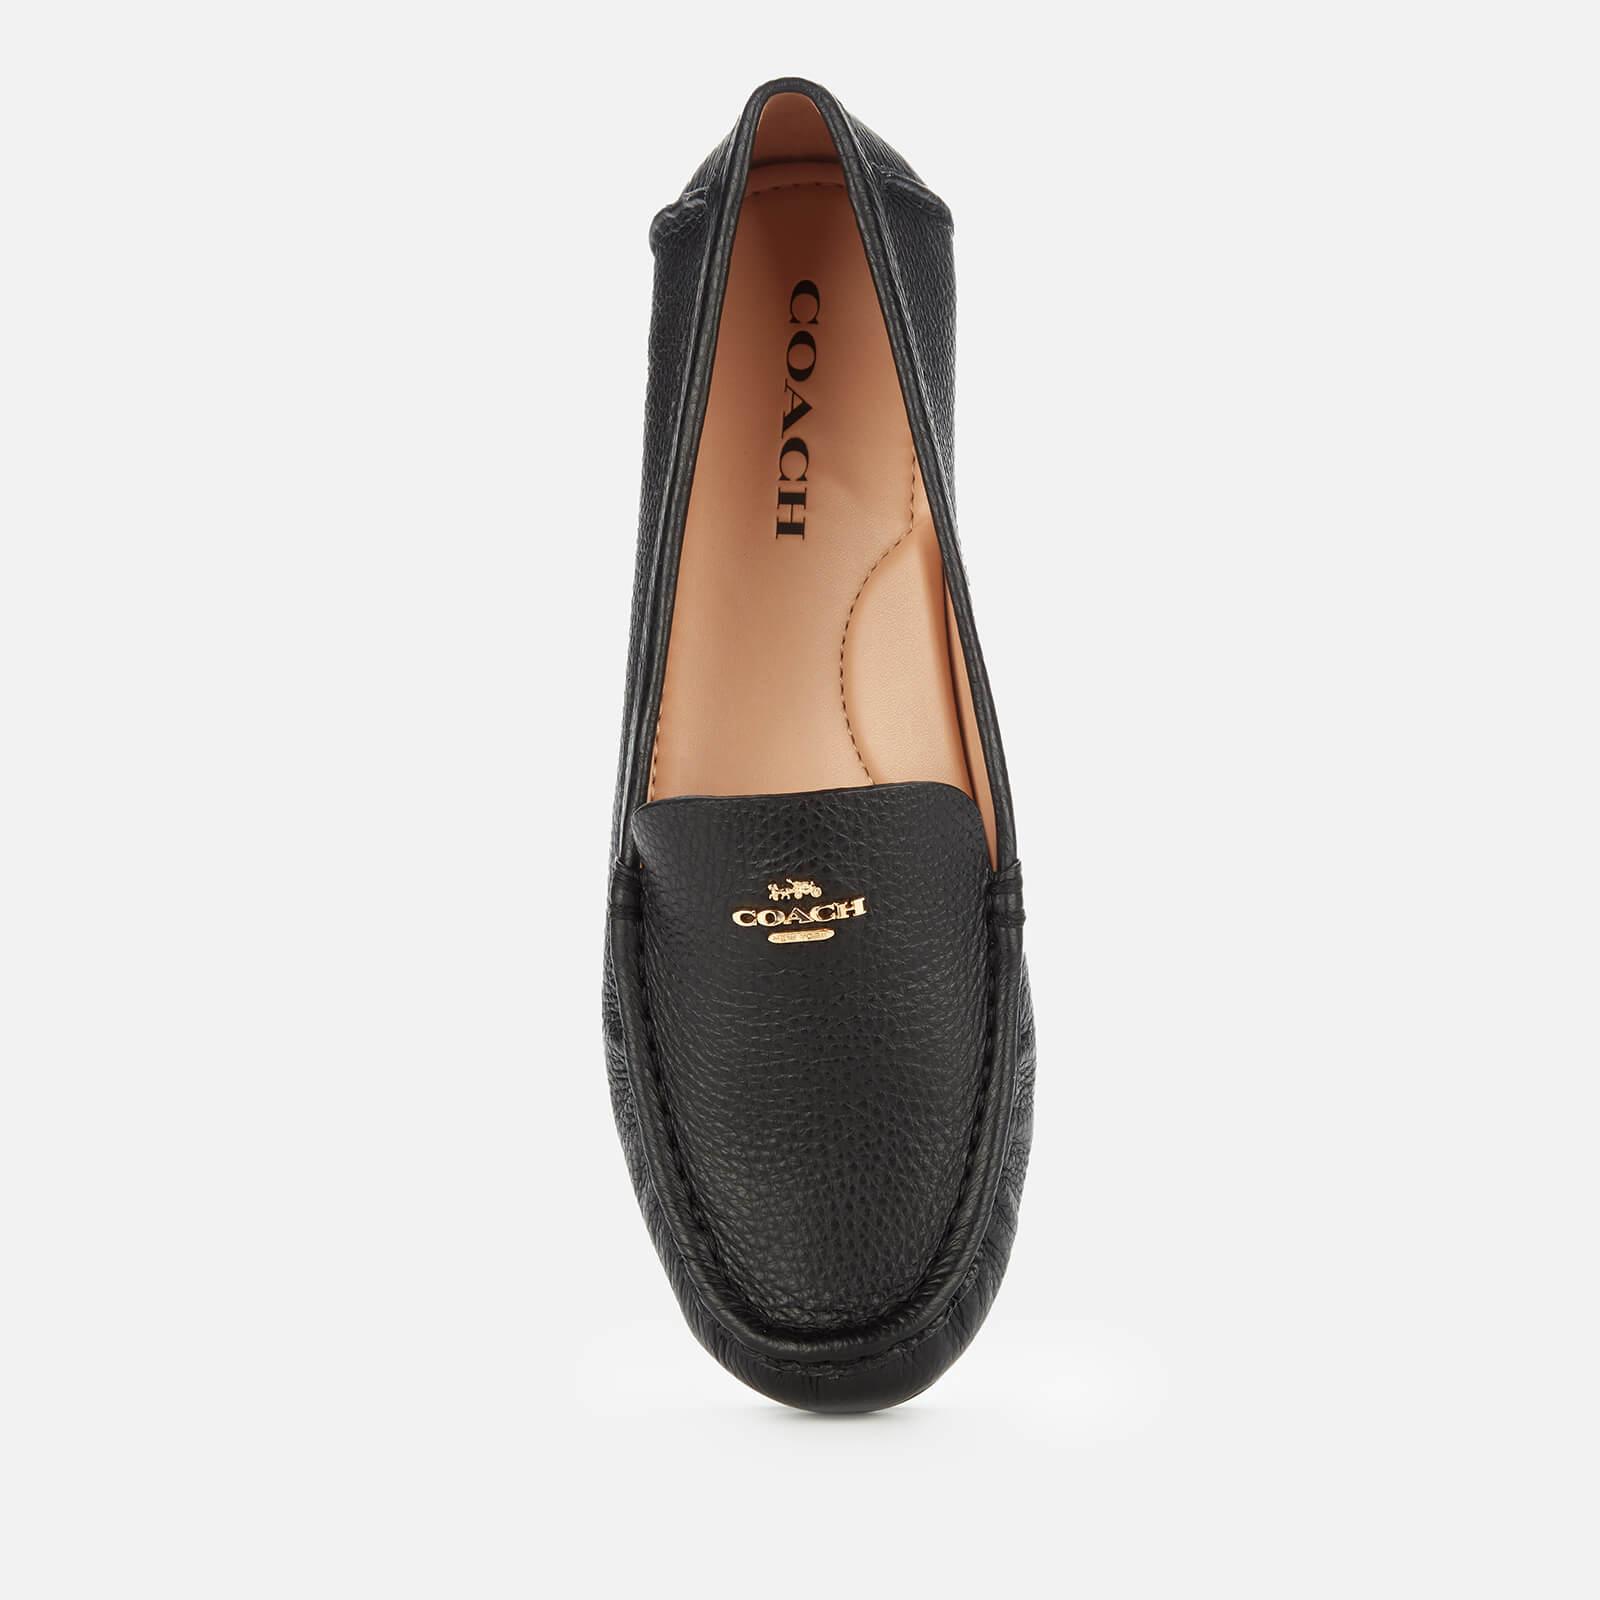 COACH Marley Leather Driving Shoes in Black - Lyst